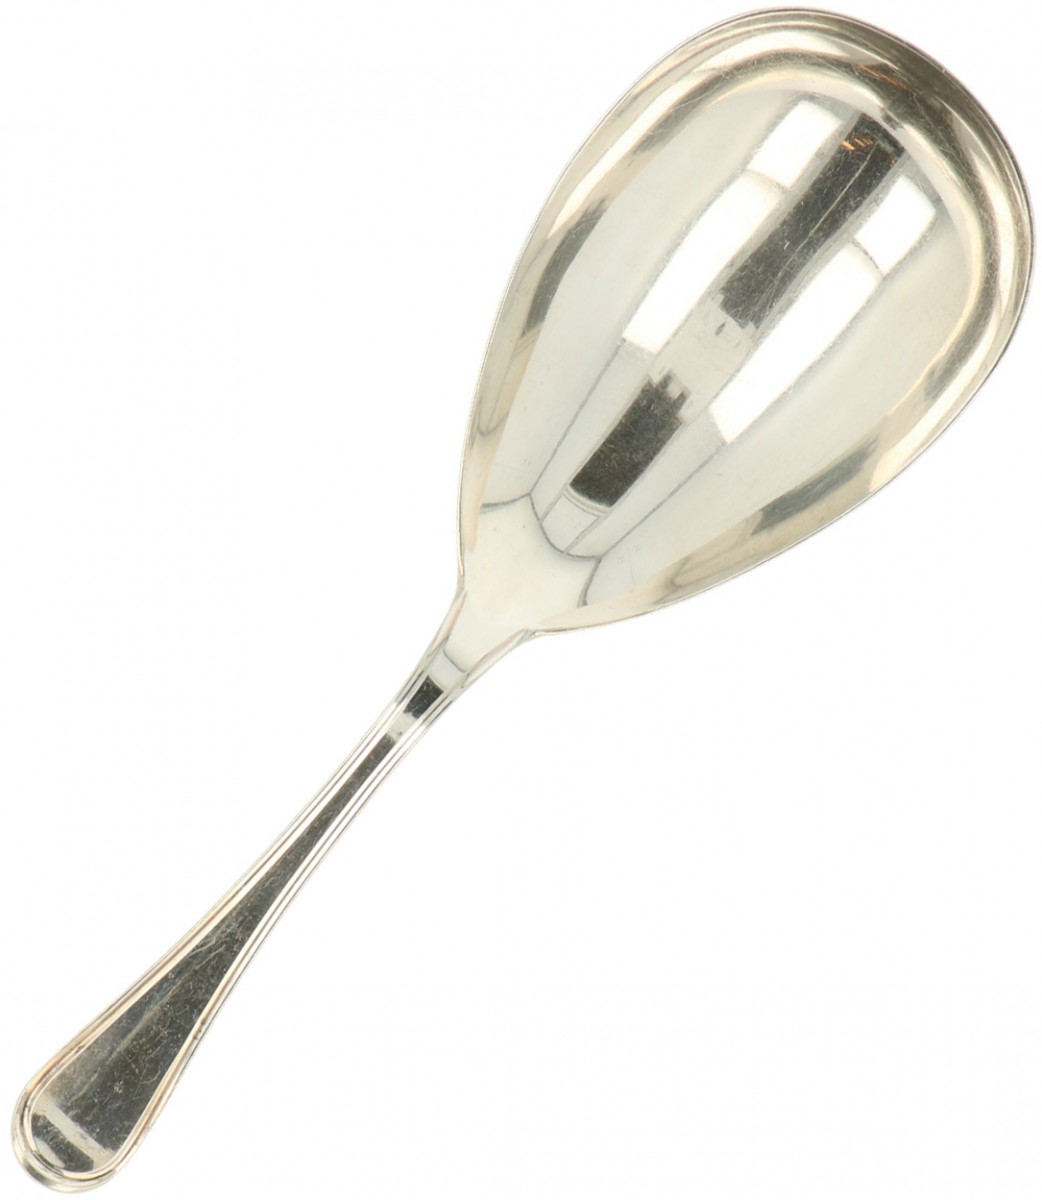 A rice spoon.